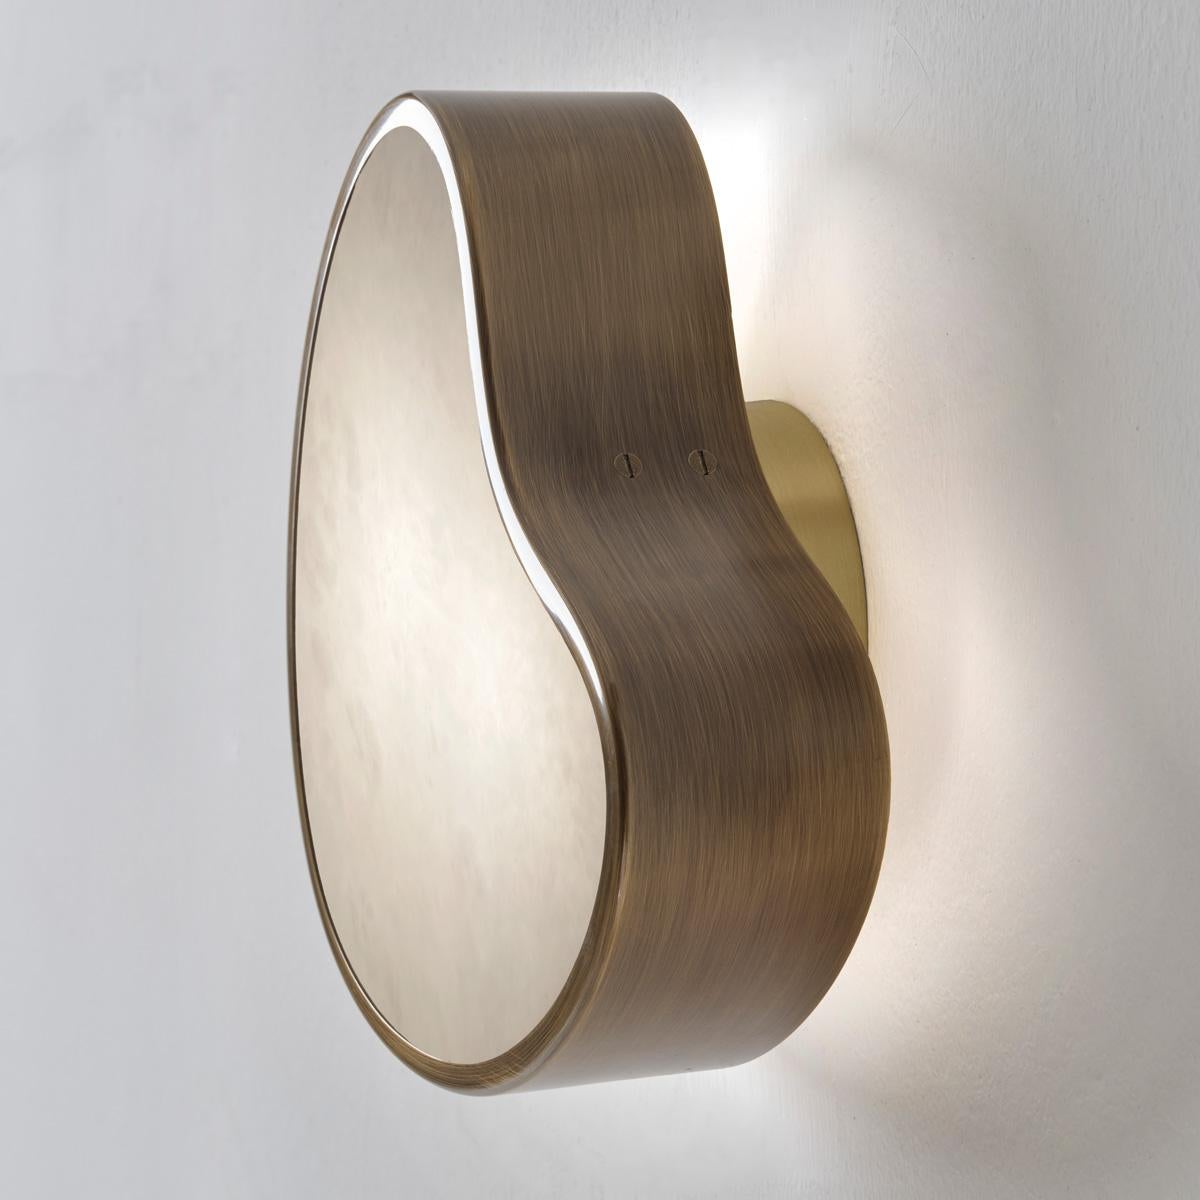 Cuore Wall Light by Gaspare Asaro. Backlit Version. Sand White Finish For Sale 4